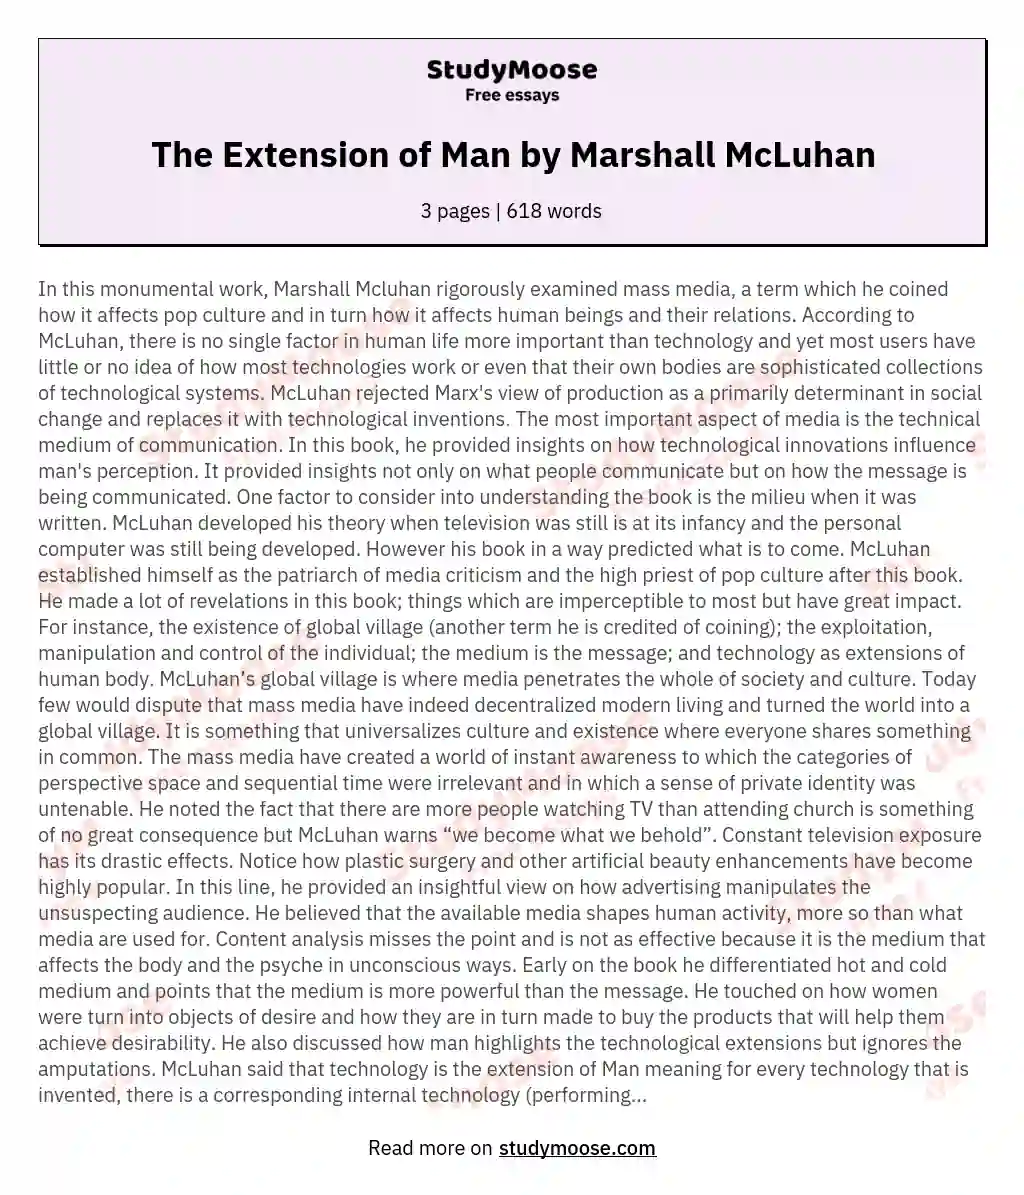 The Extension of Man by Marshall McLuhan essay